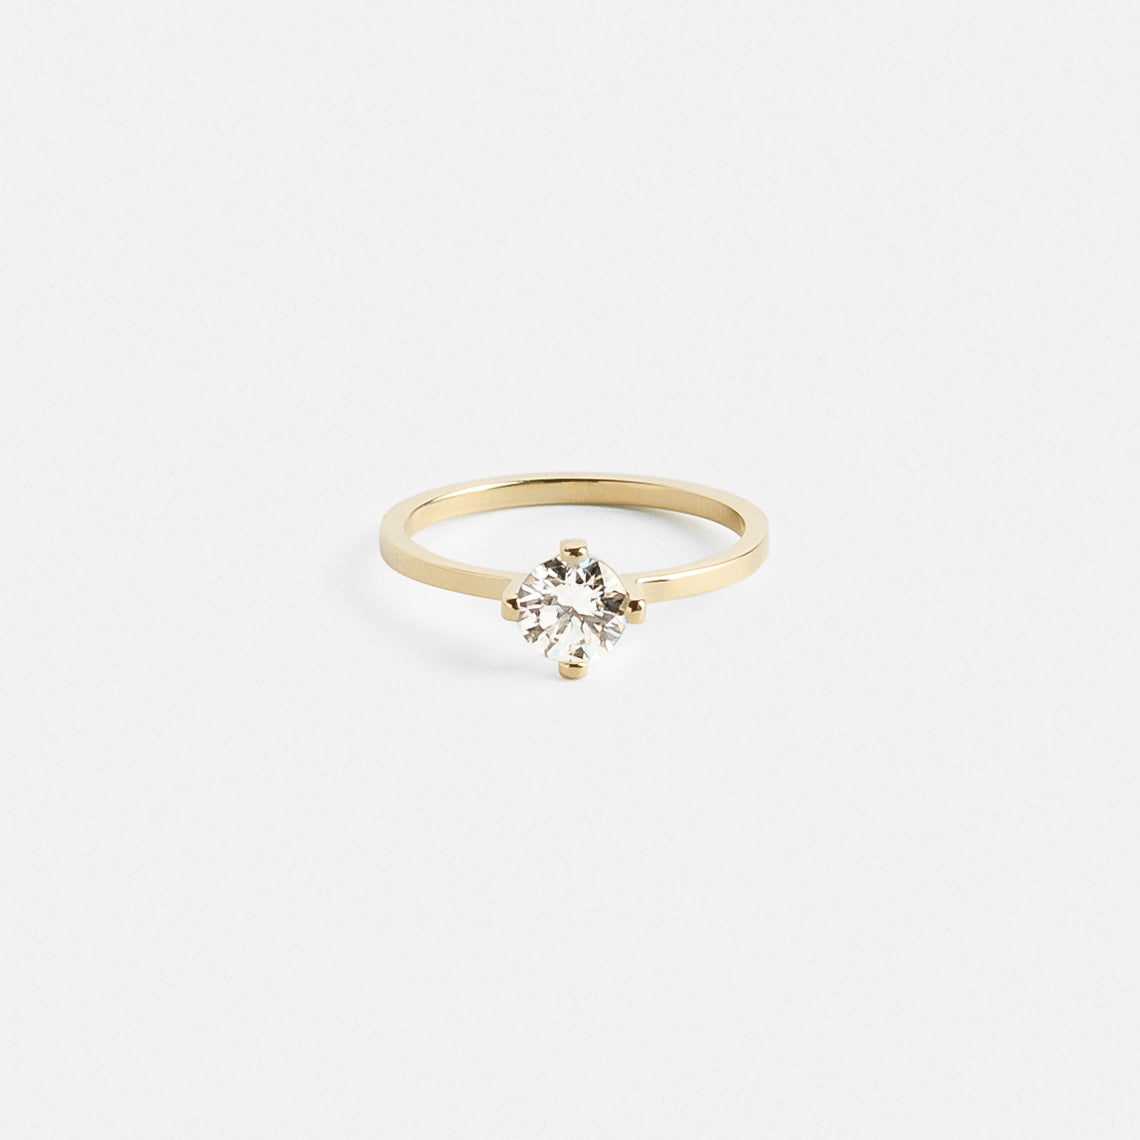 Ema Unusual Engagement Ring in 14k Gold set with a round brilliant cut 1ct natural diamond By SHW Fine Jewelry NYC